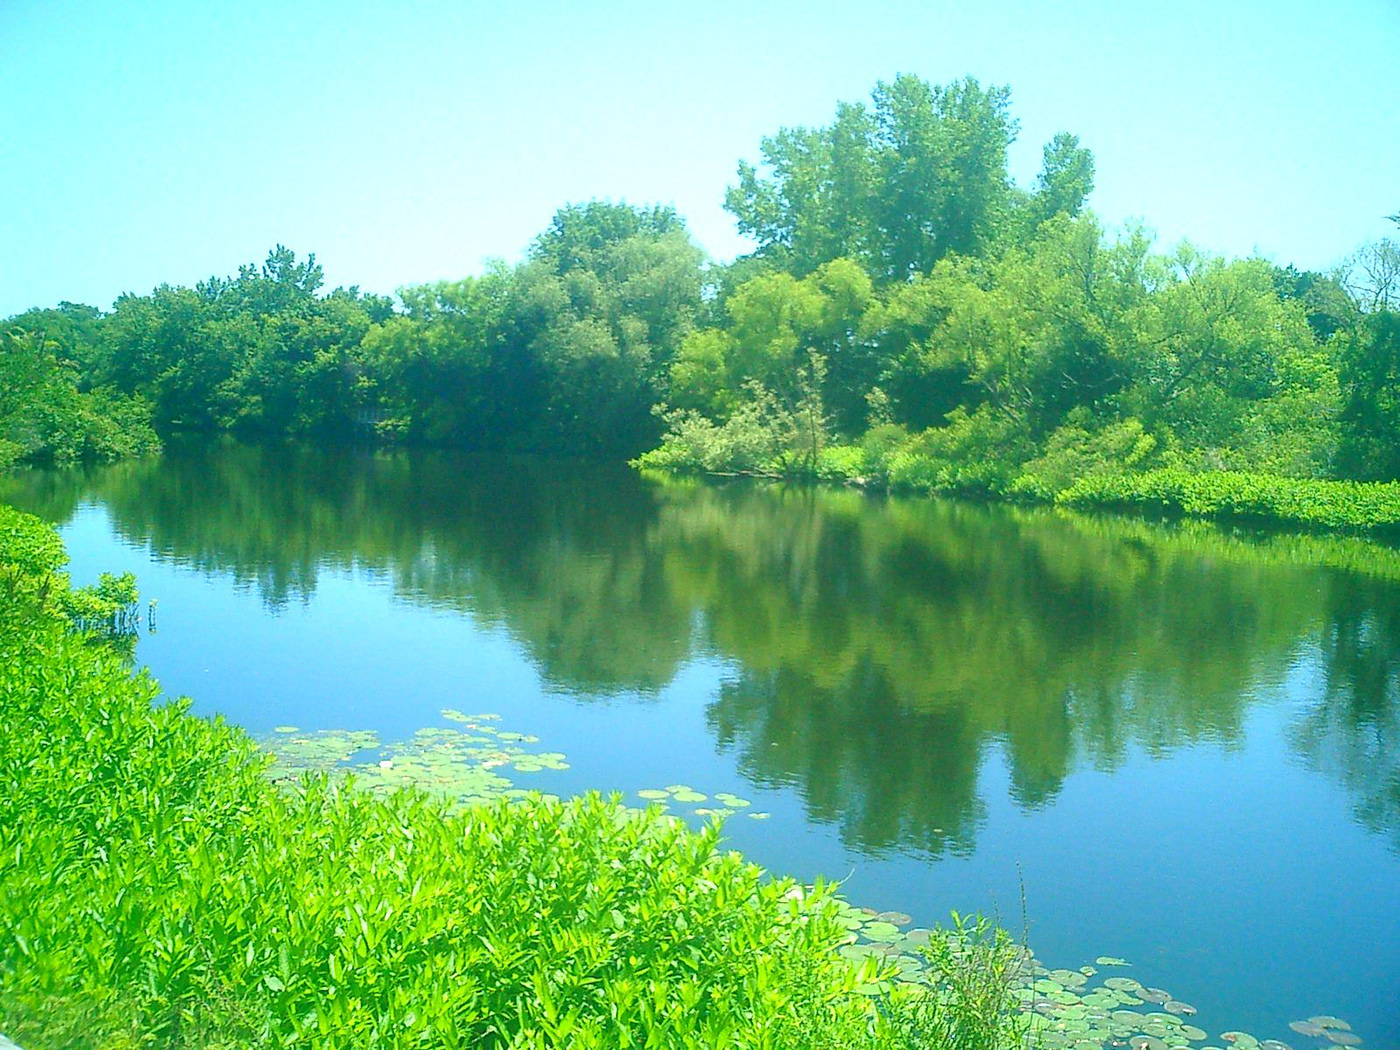 Charles River in Watertown, MA